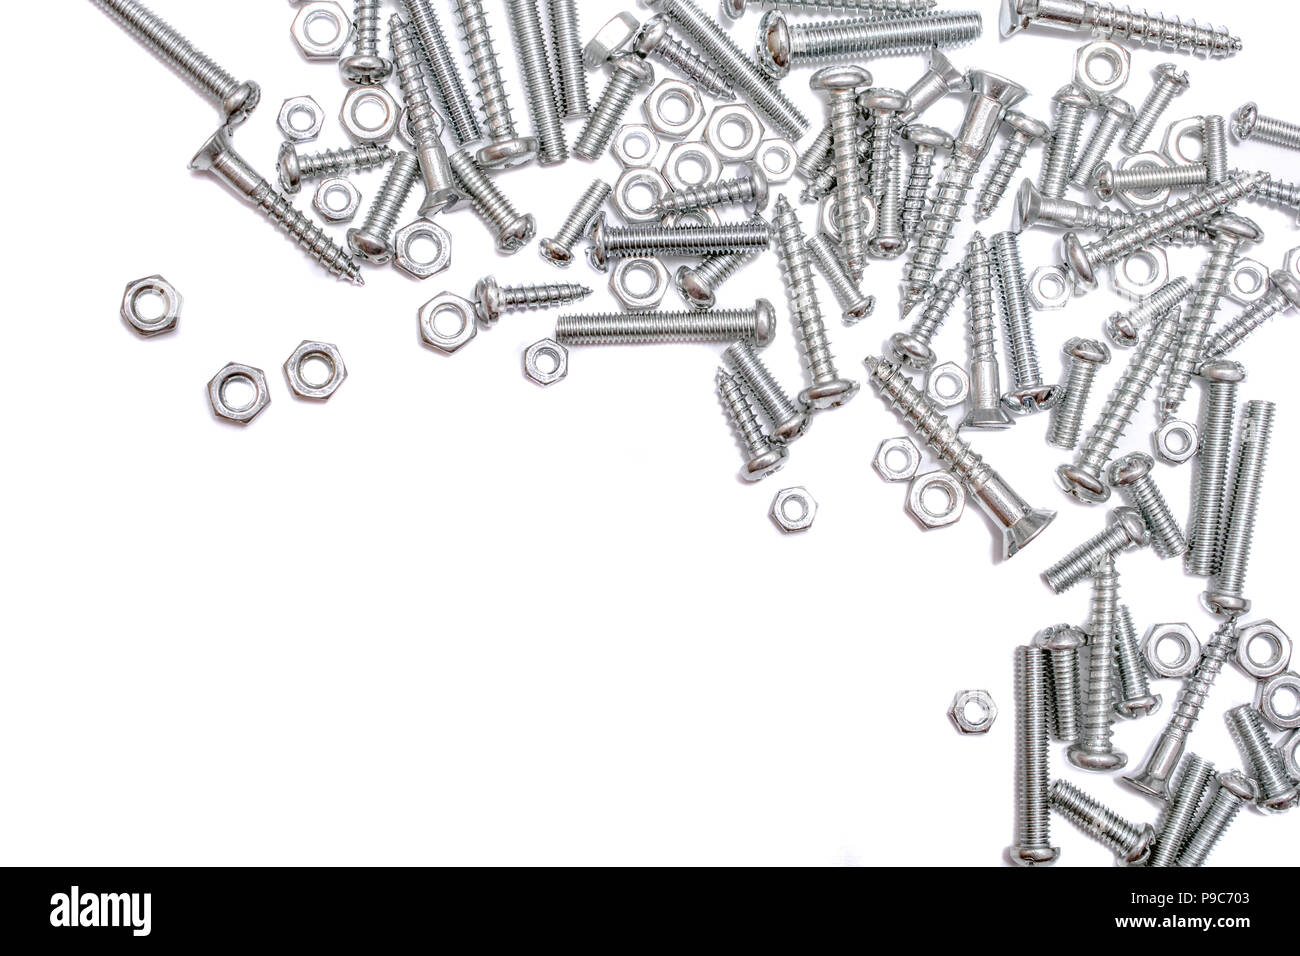 Collection Of Iron Screws, Wood Screws and Bolts At The Right and Top Border Of A Whitebox Stock Photo